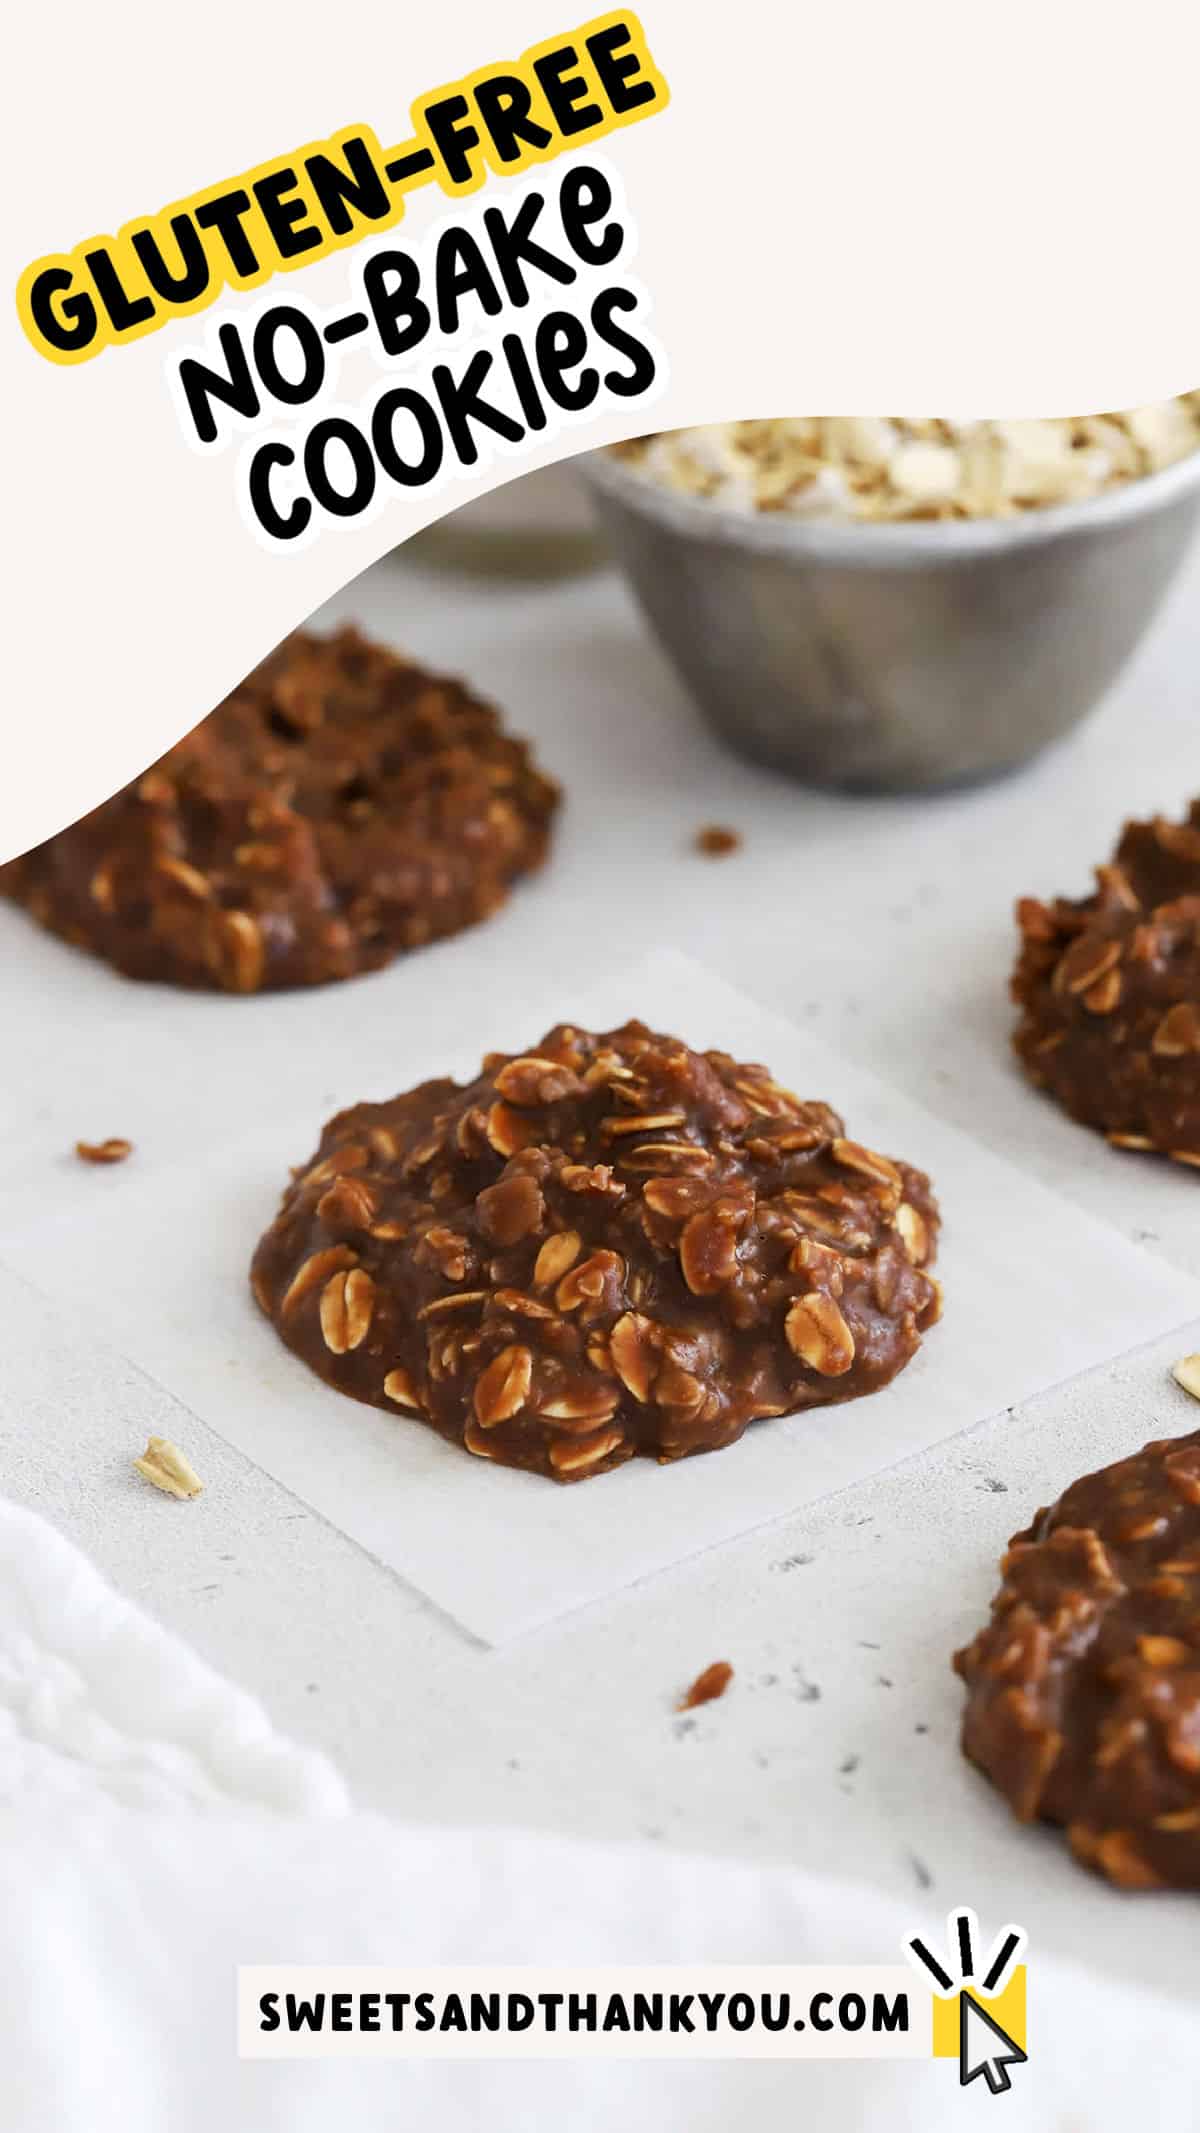 The BEST Gluten-Free No-Bake Cookies around! These gluten-free chocolate peanut butter no-bake cookies have all the flavor you love, simply made gluten-free! Made on the stove with simple ingredients, they're the perfect easy gluten-free treat when you don't want to turn on the oven. 